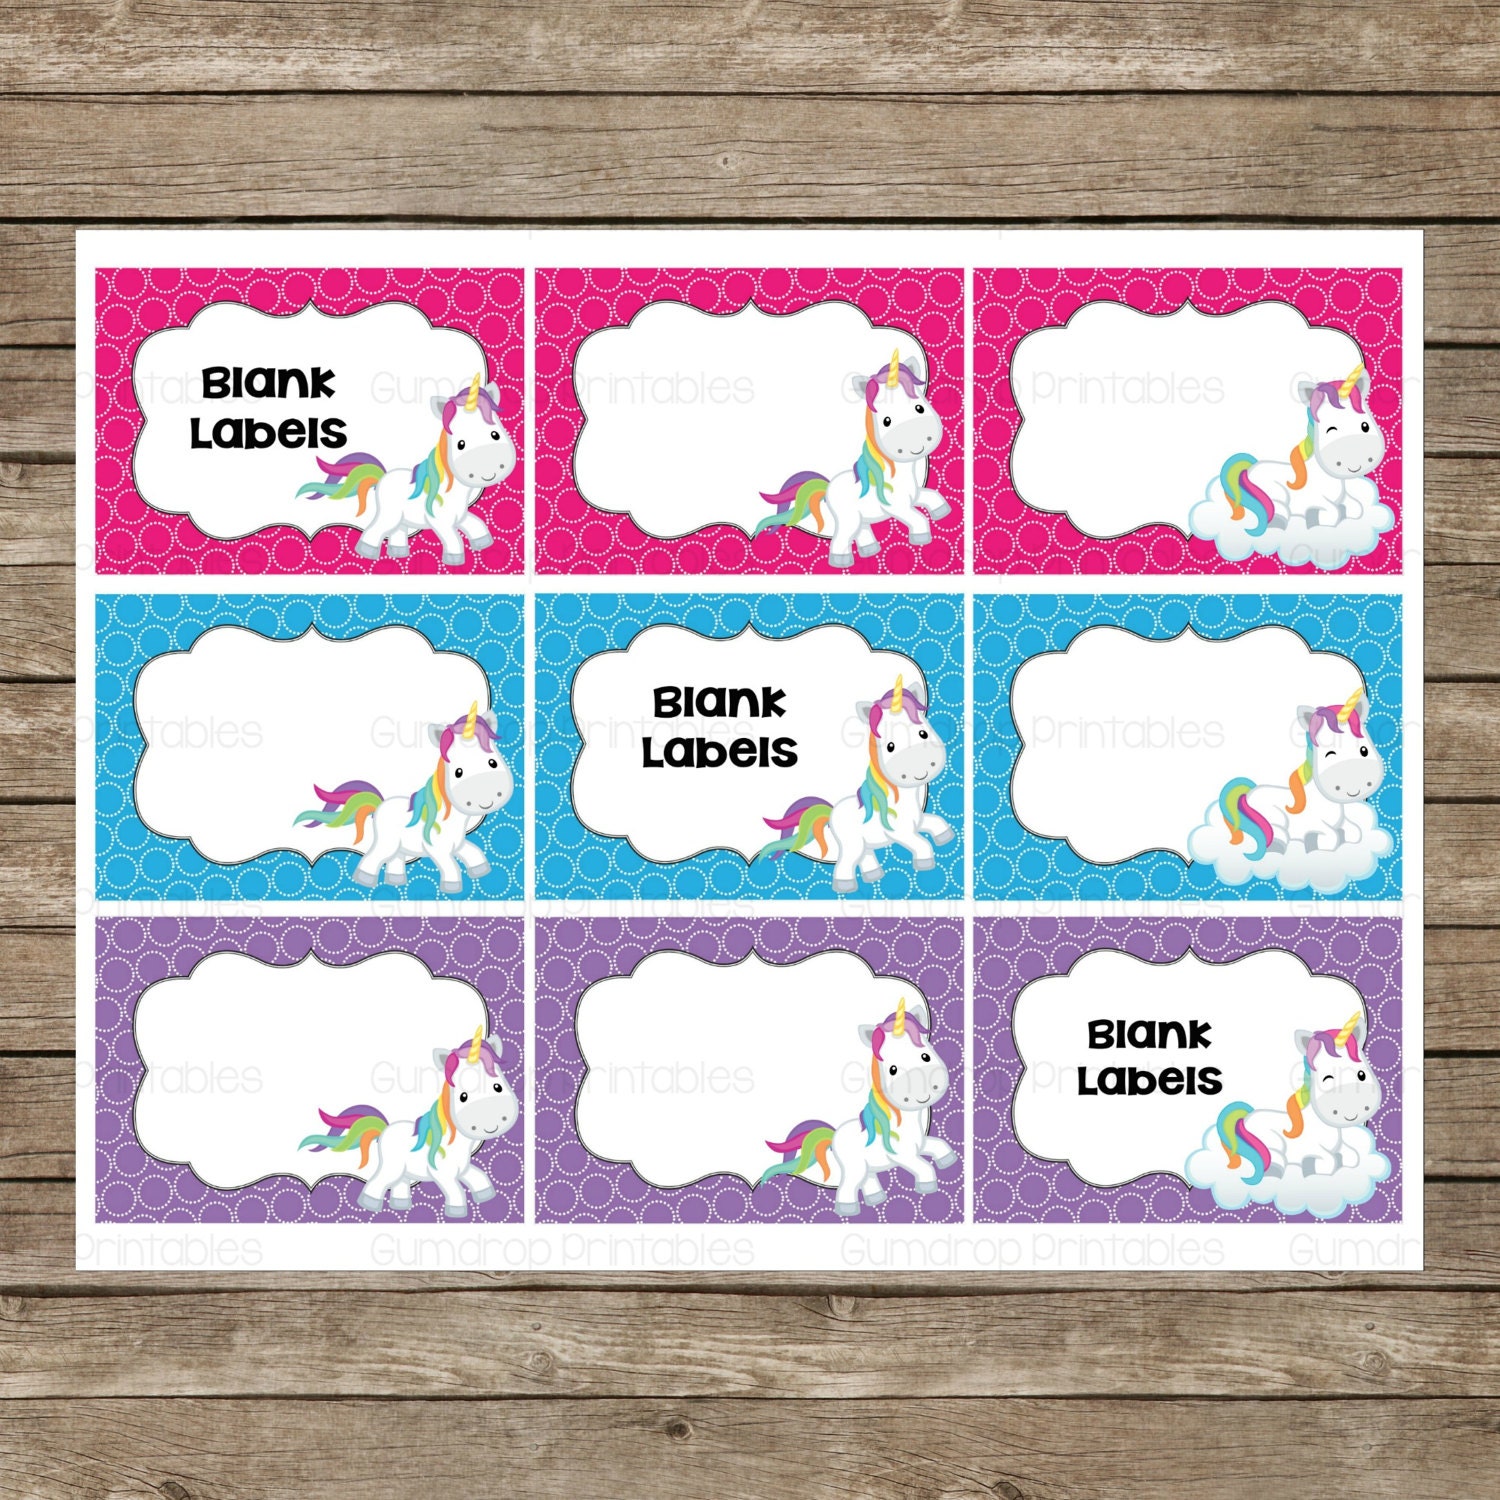 unicorns-blank-labels-gift-tags-instant-download-party-supplies